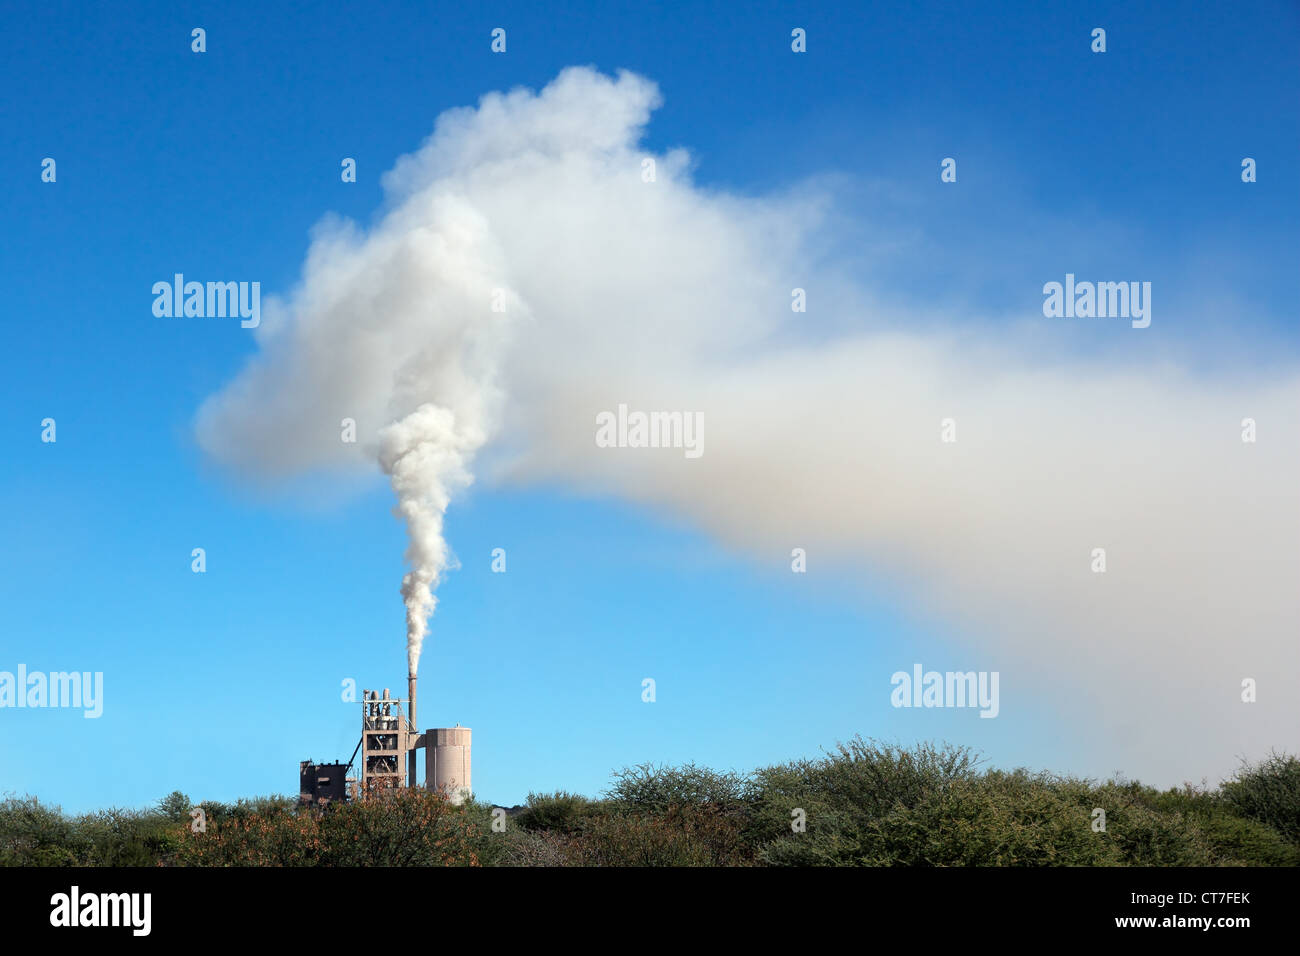 Smoke from an industrial plant drifting in the wind against a blue sky Stock Photo